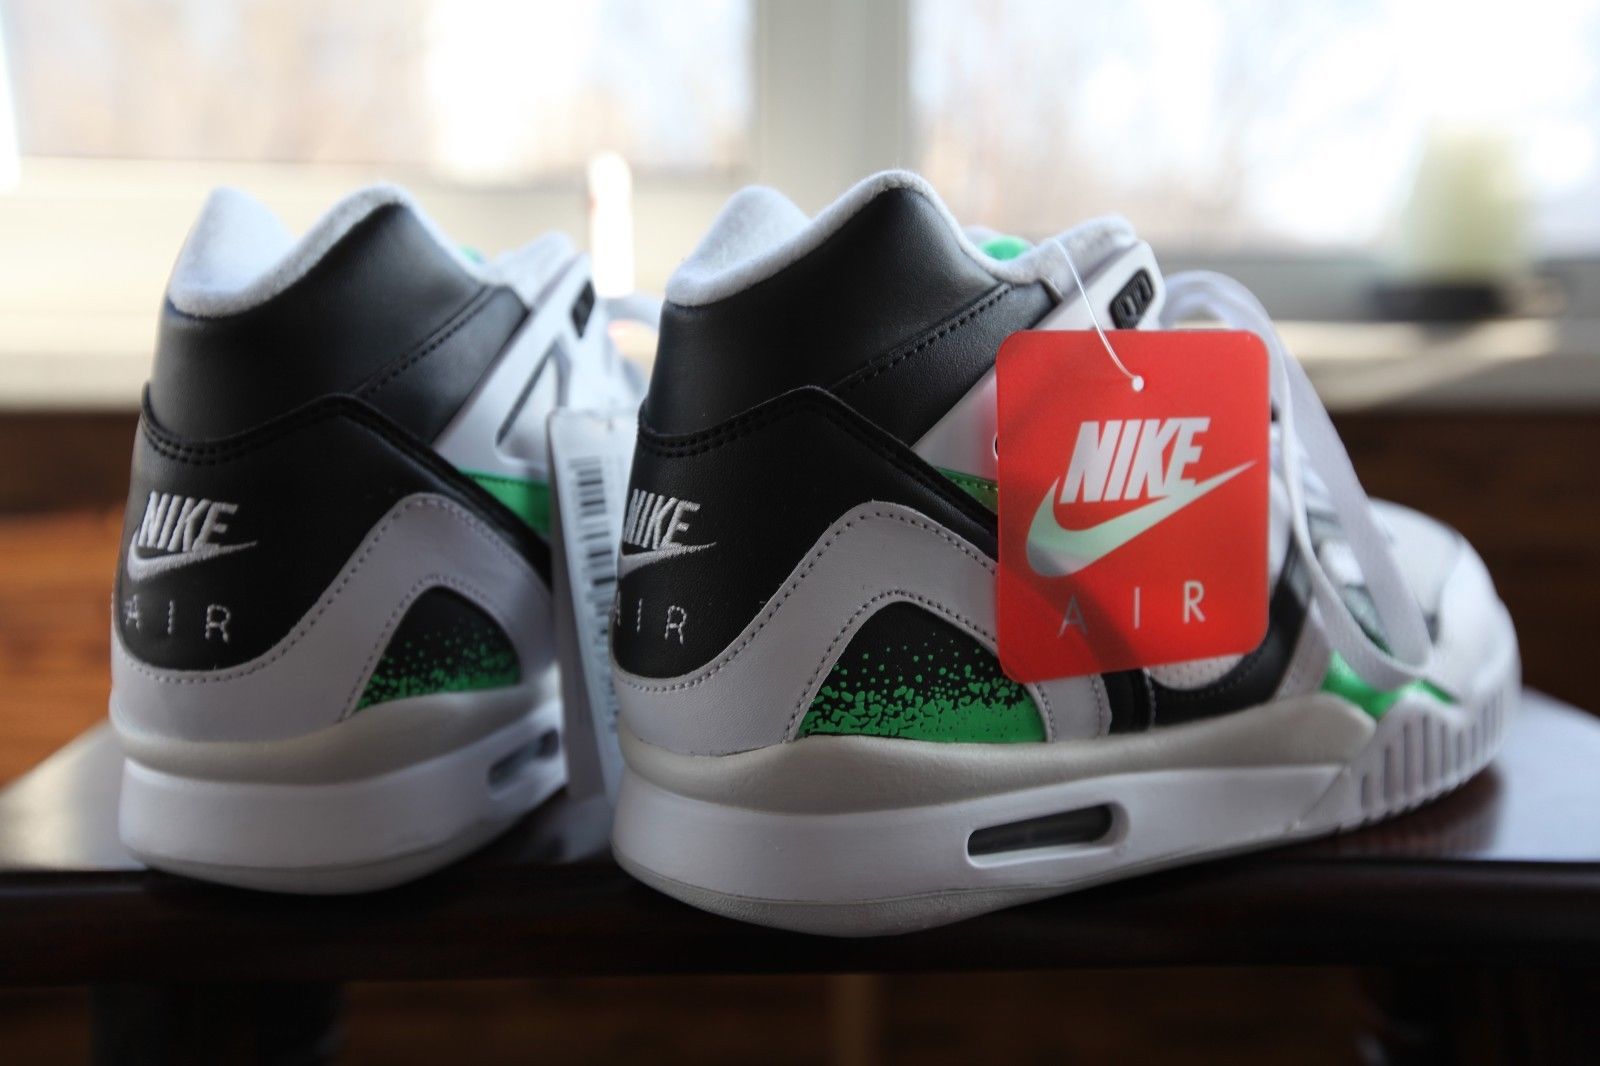 Nike Air Tech Challenge II “Poison Green” – Available